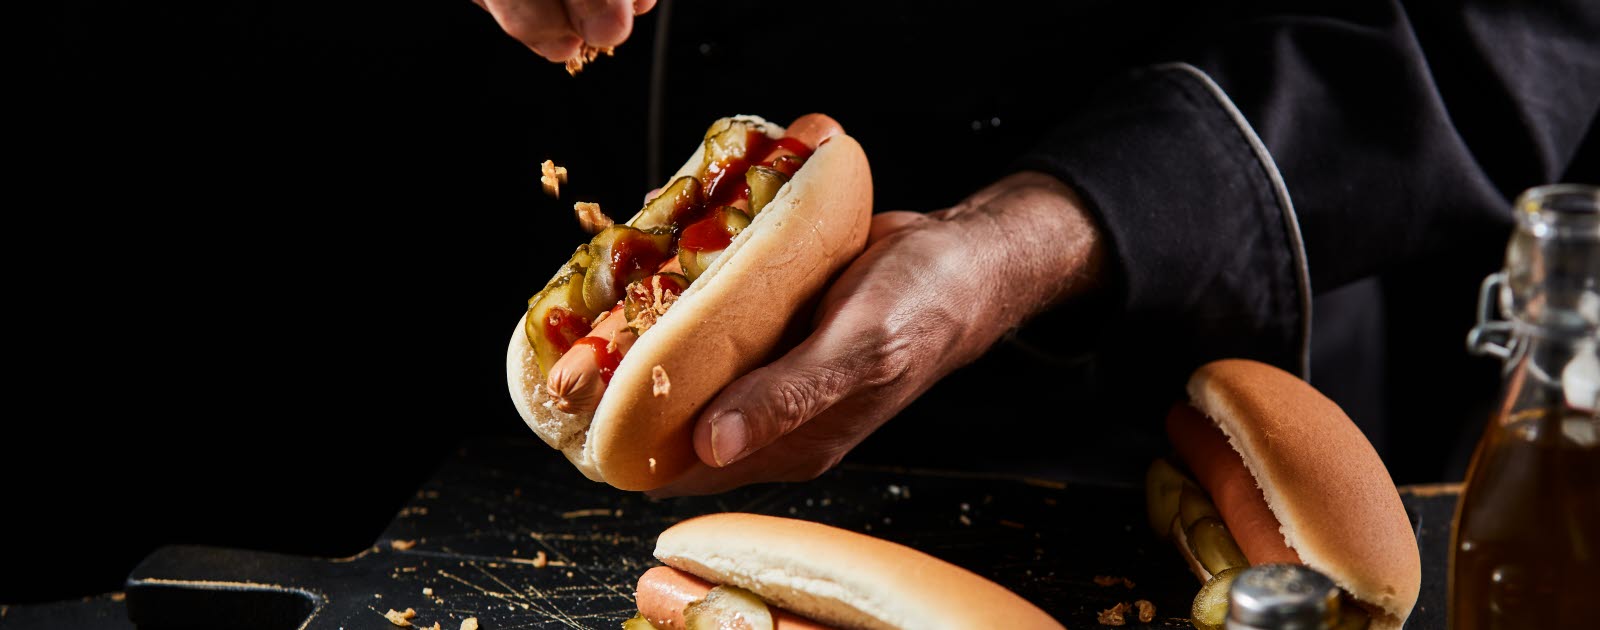 Man's hands preparing hotdogs with pickles, ketchup and roasted onion.